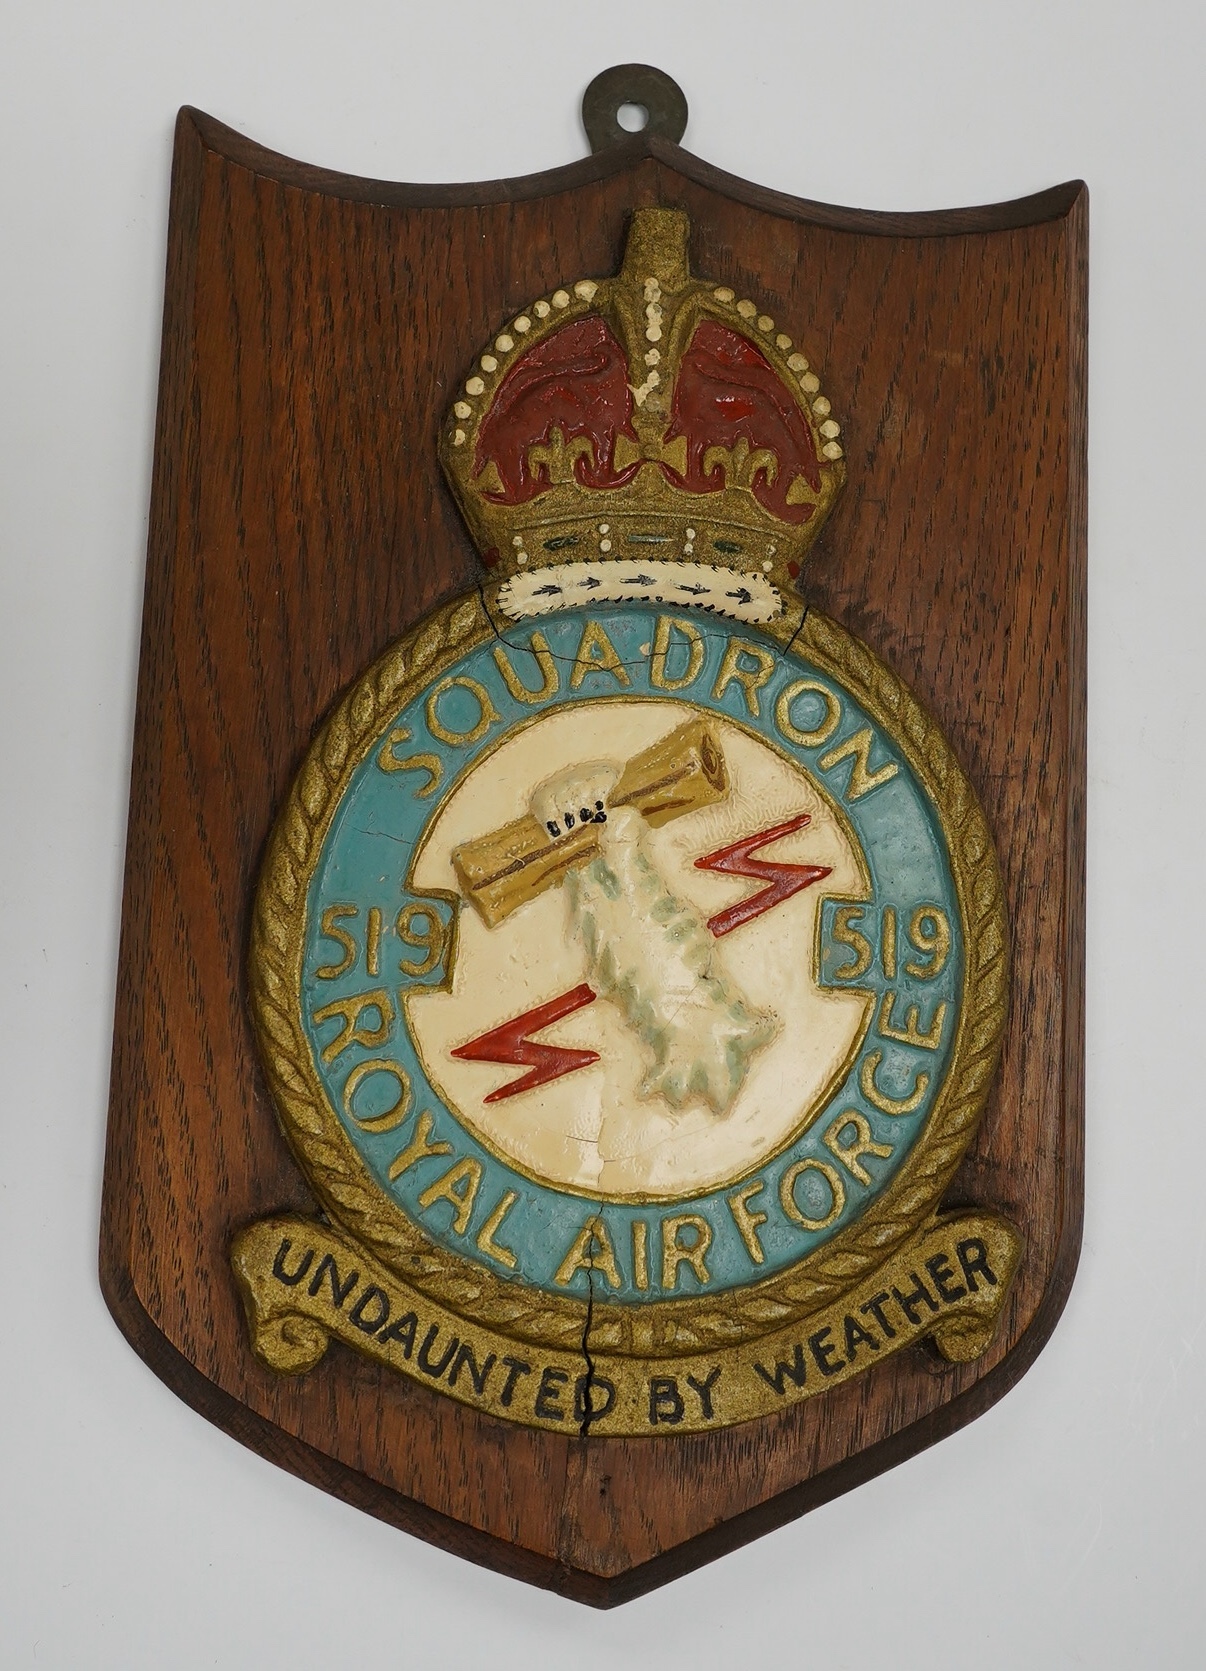 A Distinguished Flying Medal group awarded to Flight Sergeant A. Savage, comprising of the Distinguished Flying Medal together with the Atlantic Star, the 1939-1945 Star and the War Medal